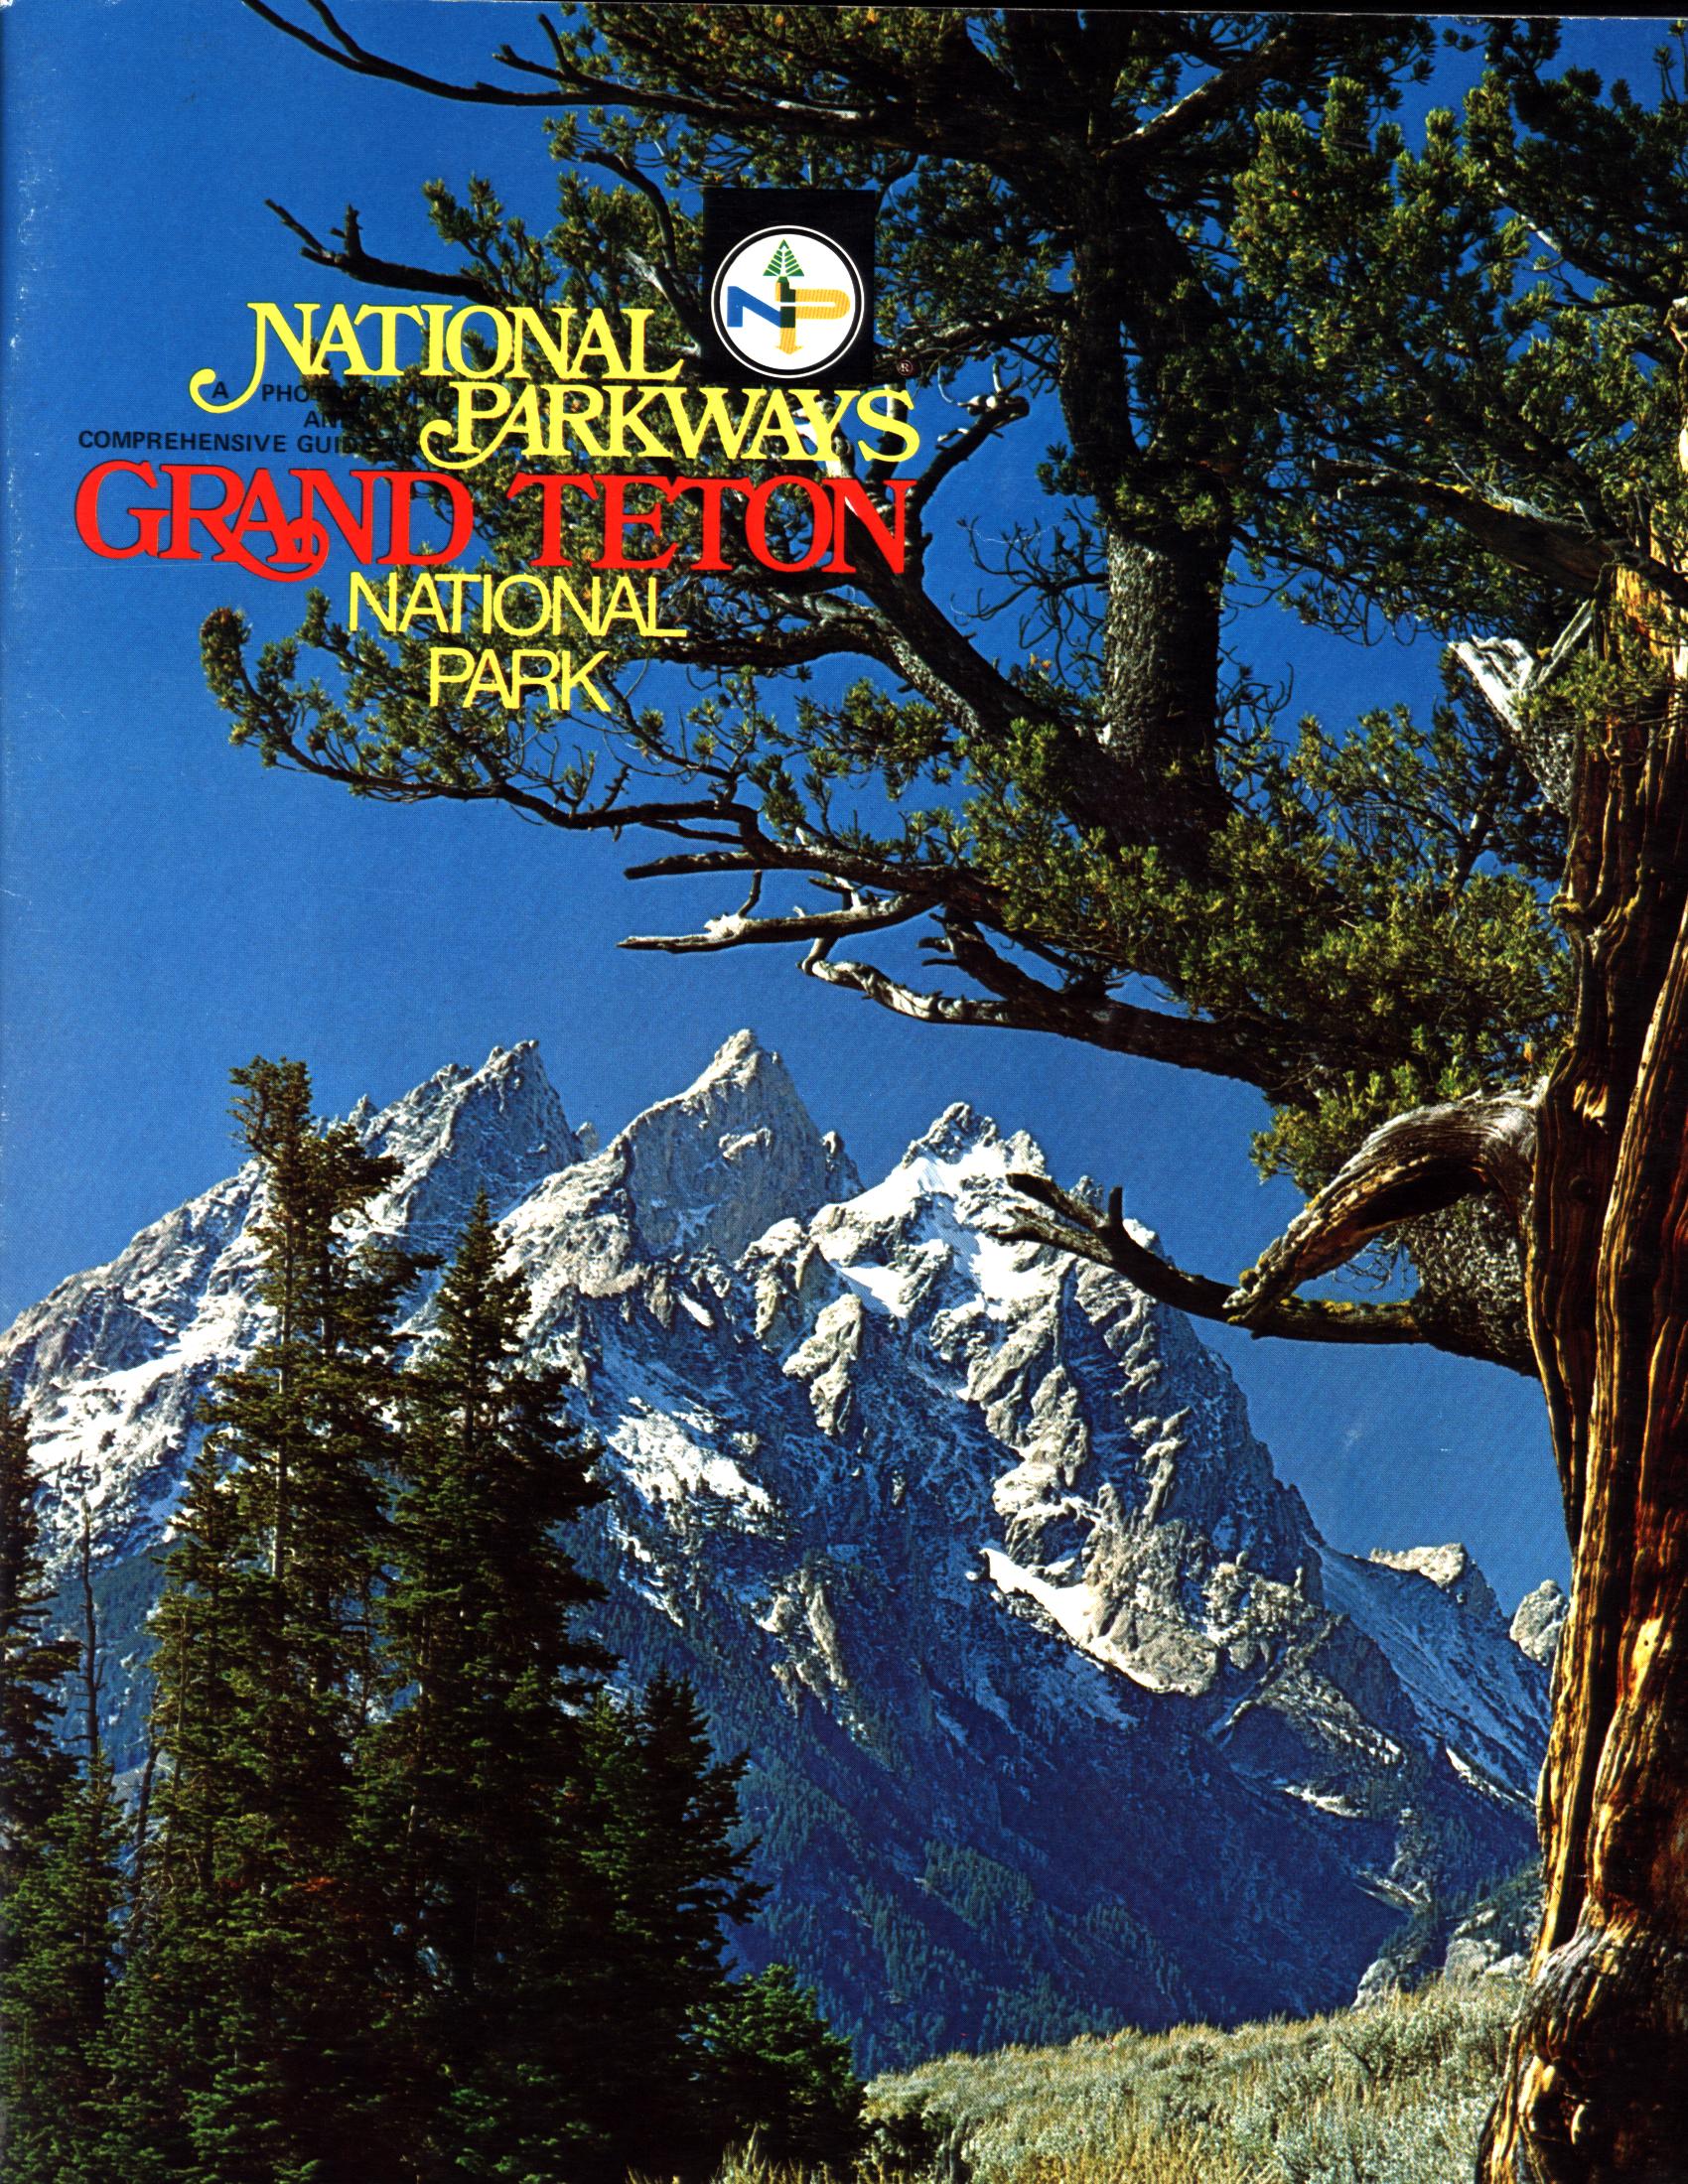 GRAND TETON NATIONAL PARK--a photographic and comprehensive guide.